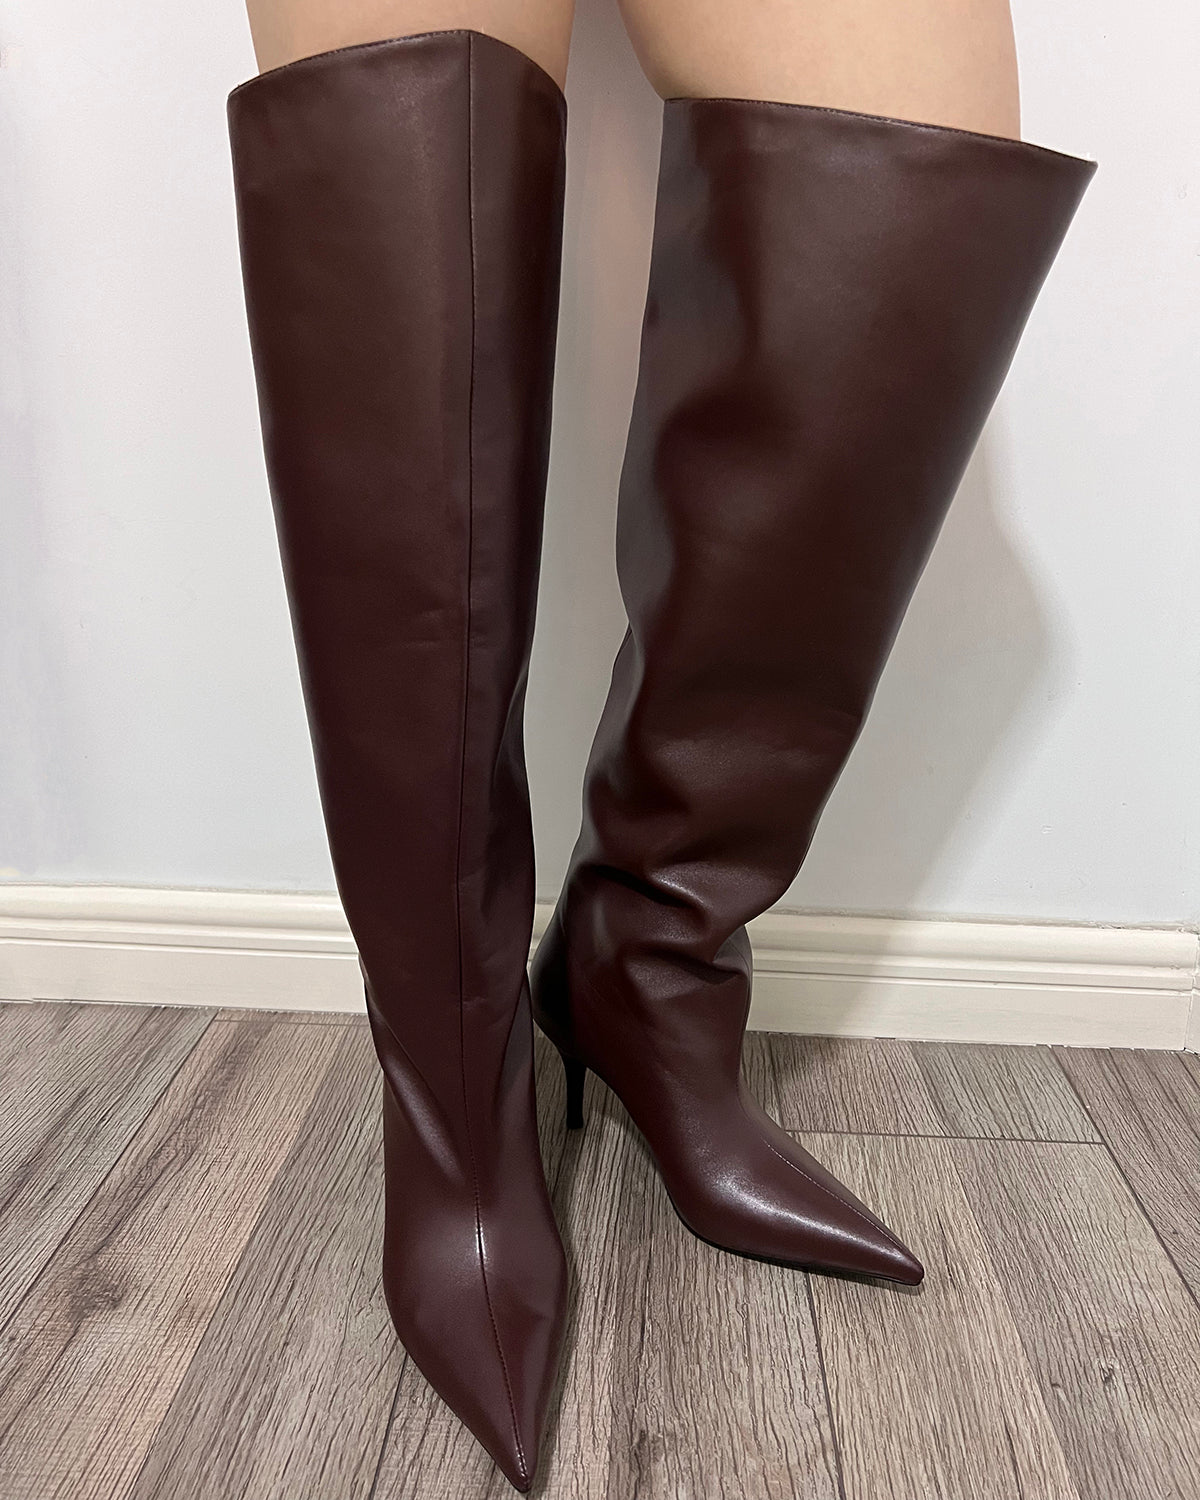 Burgundy leather over the knee wide calf boots for women